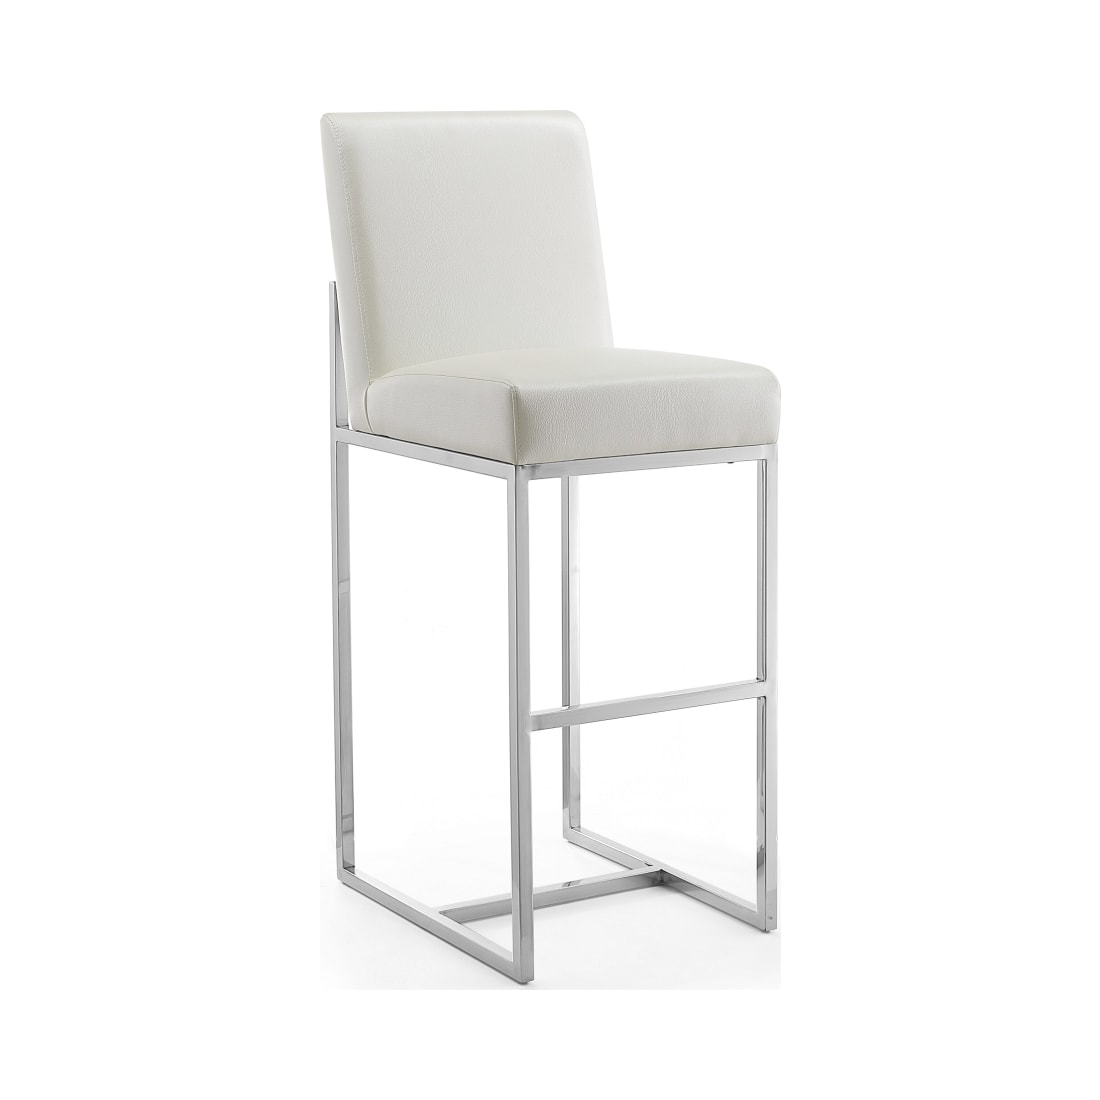 Element 29” Faux Leather Bar Stool in Pearl White and Polished Chrome